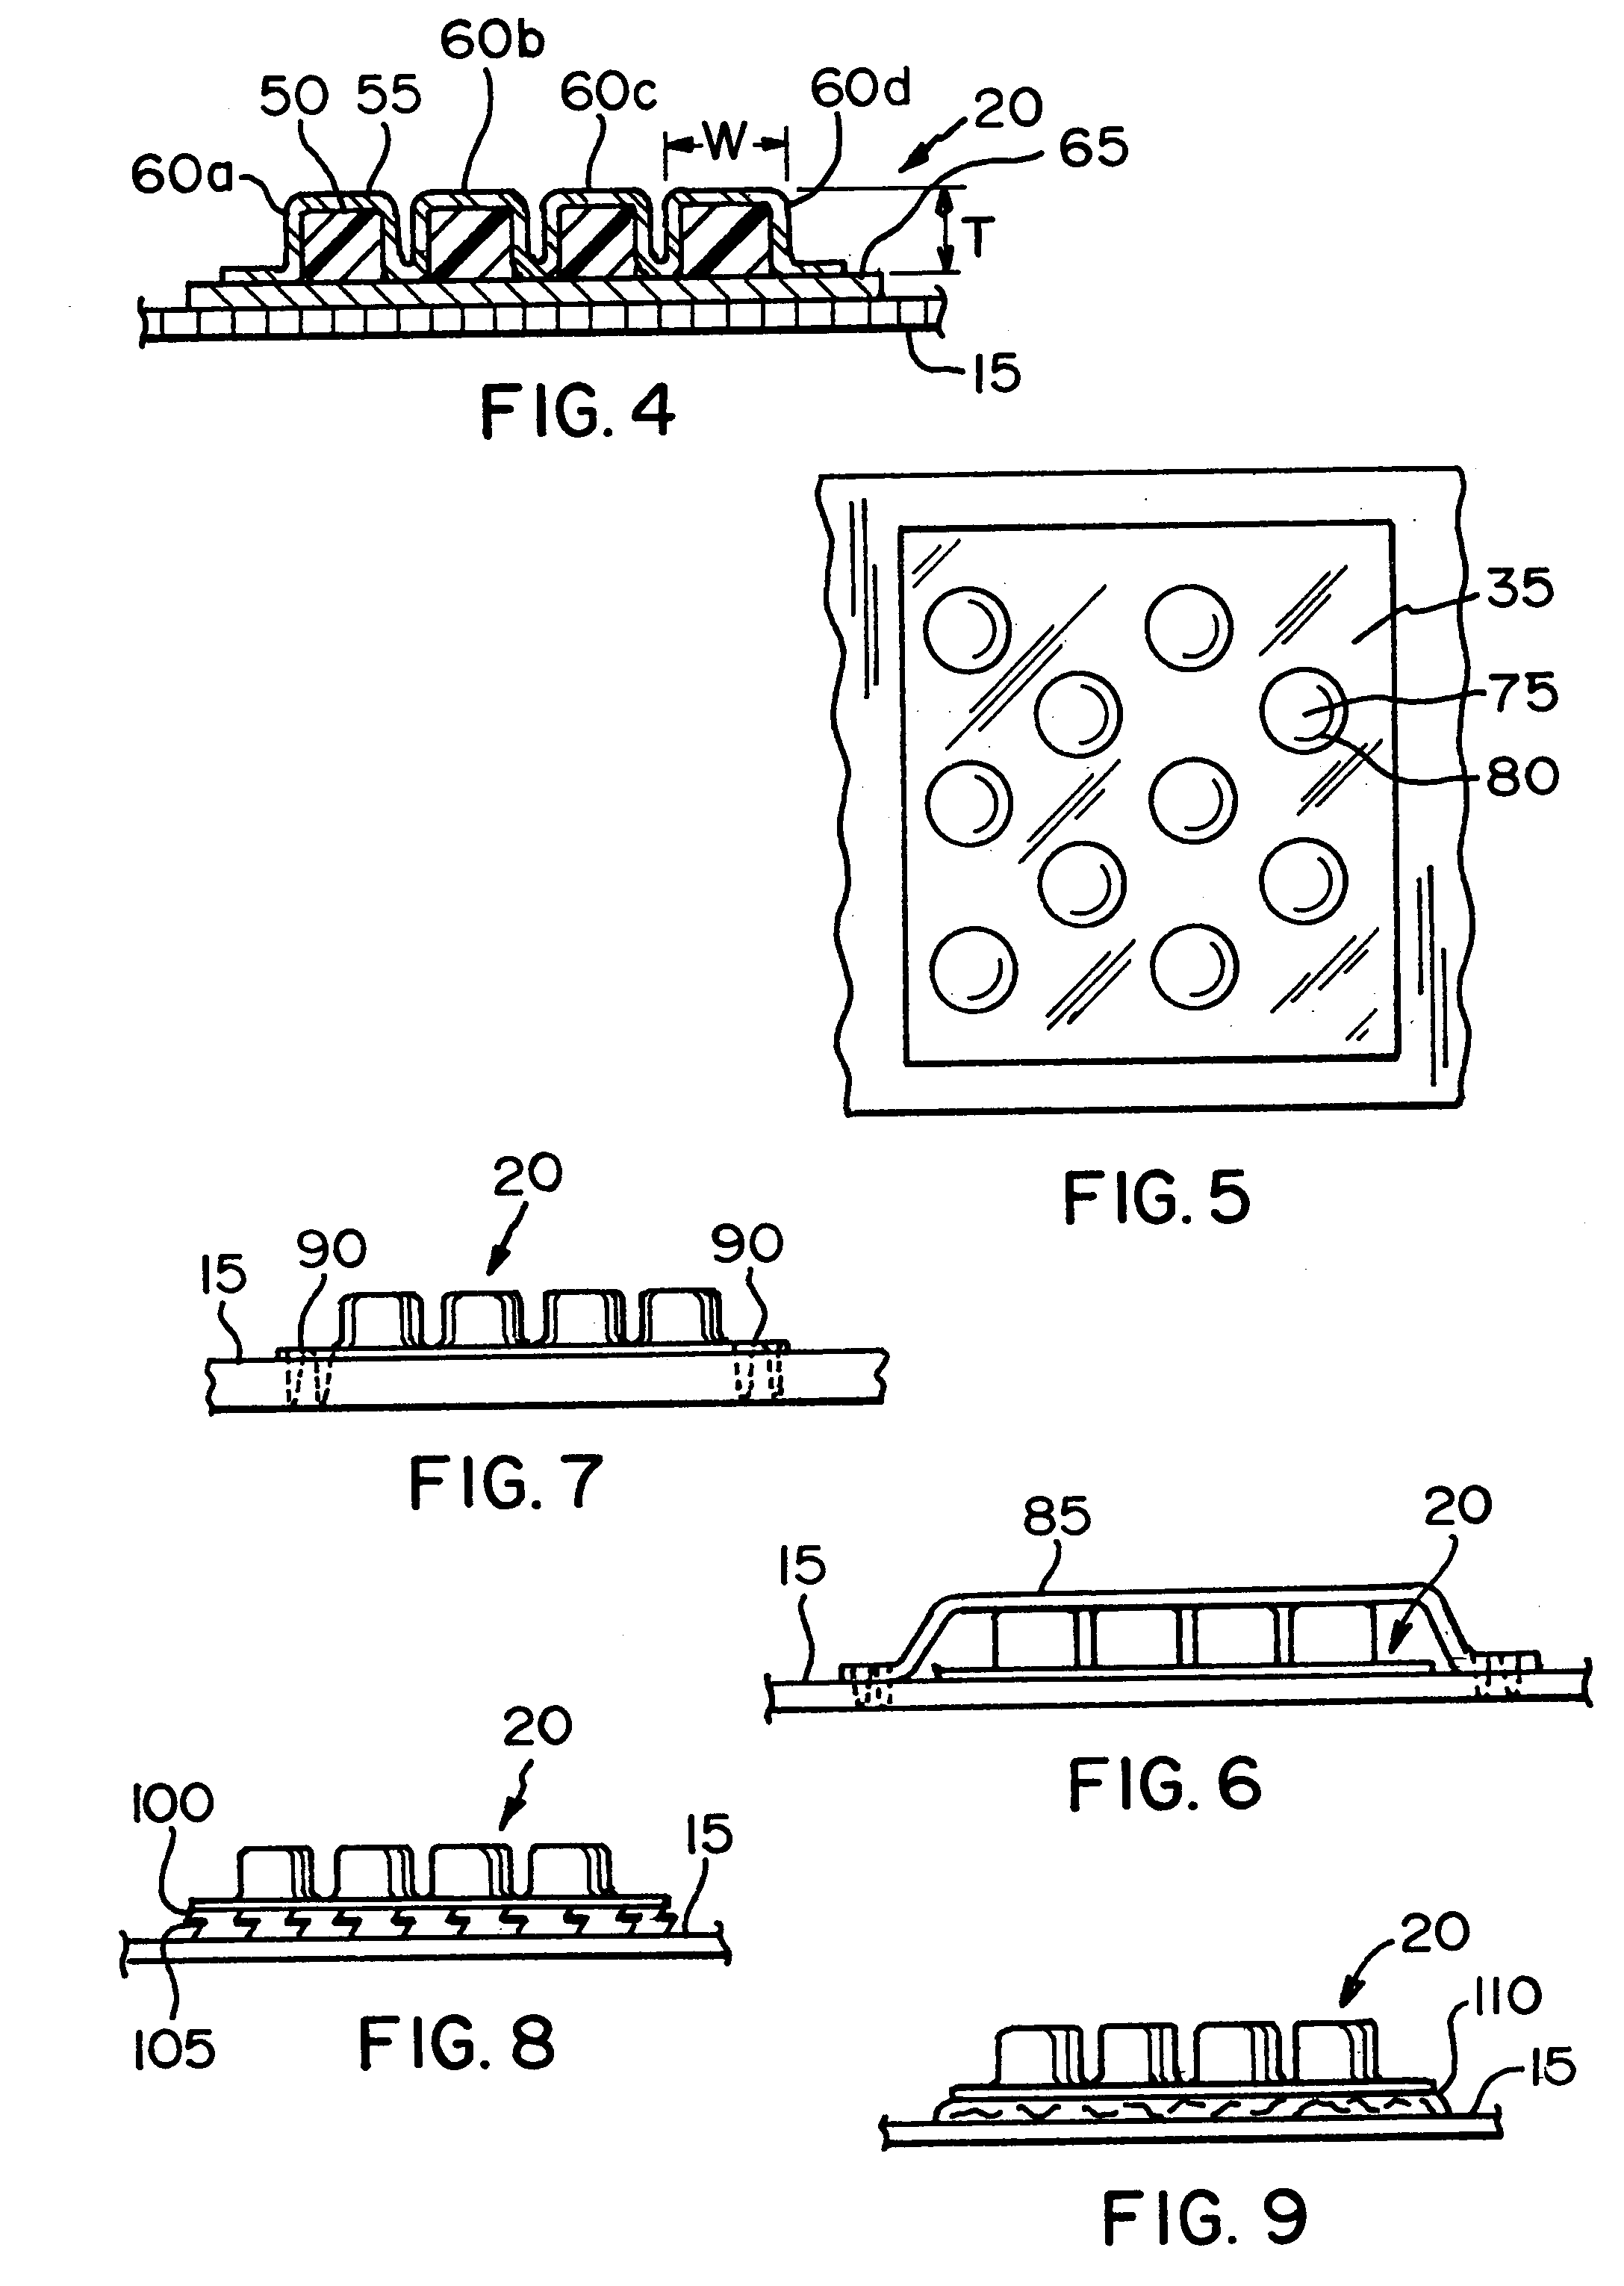 Garment with energy dissipating conformable padding